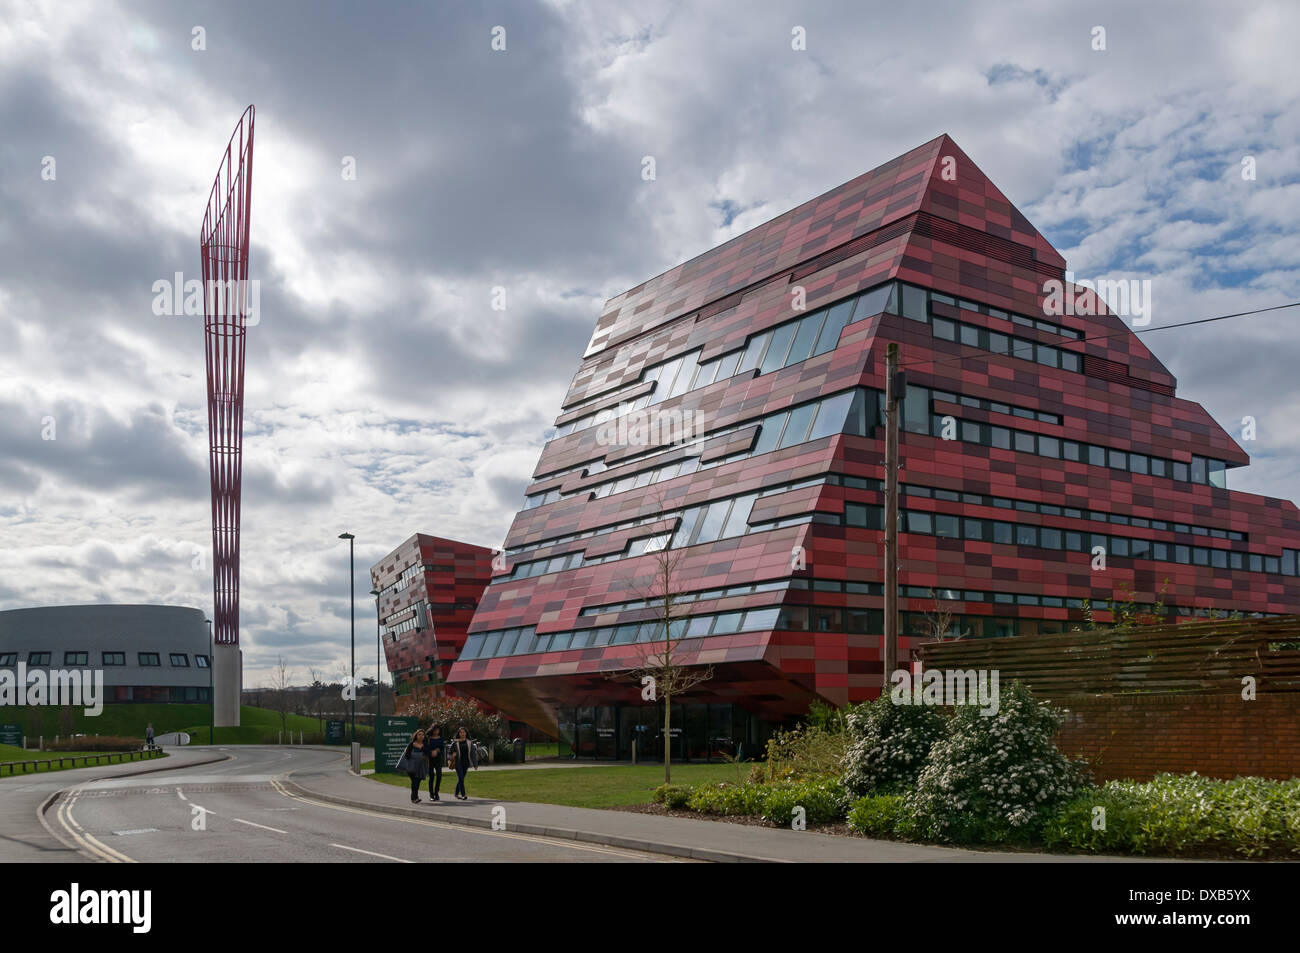 The Yang Fujia building (Make Architects) and the Aspire Tower sculpture, Jubilee Campus, Nottingham University, England, UK. Stock Photo